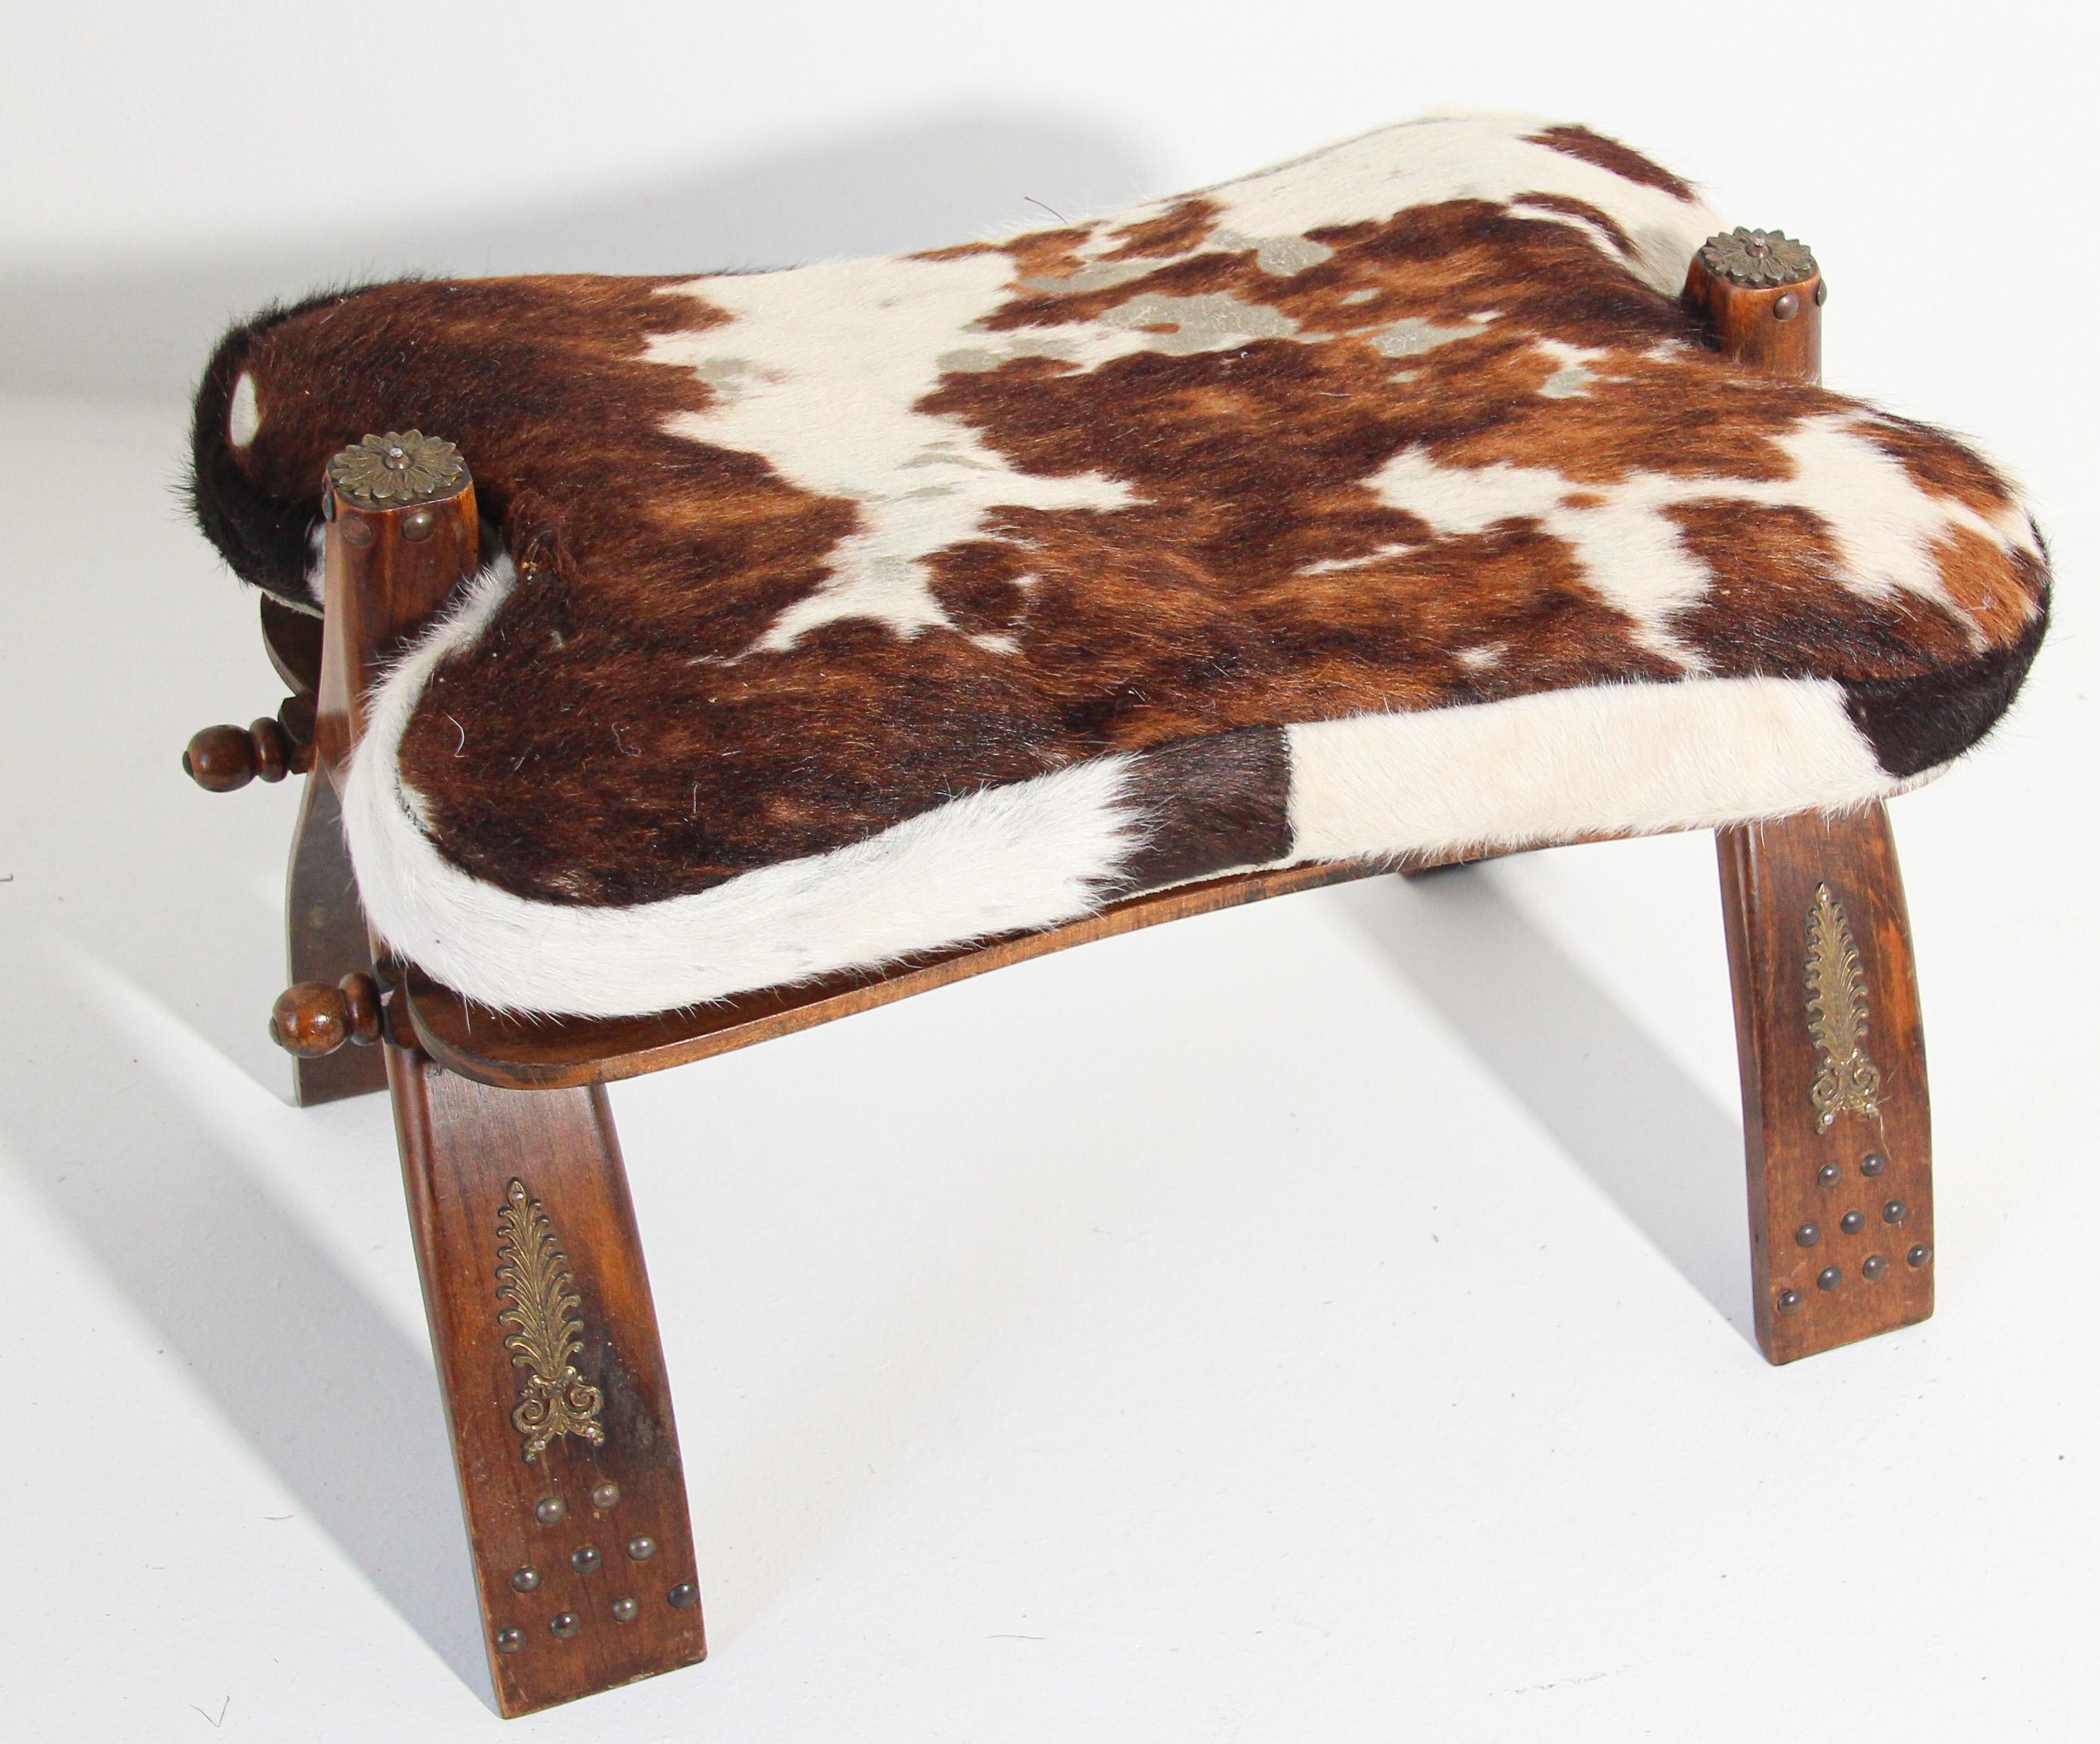 Vintage Moroccan, North Africa camel saddle shape stool.
Traditionally used to ride camels in the desert of Africa and the Middle East, this camel saddle could be used as a foot stool or just as an accent tribal piece in any room.
Wooden base is